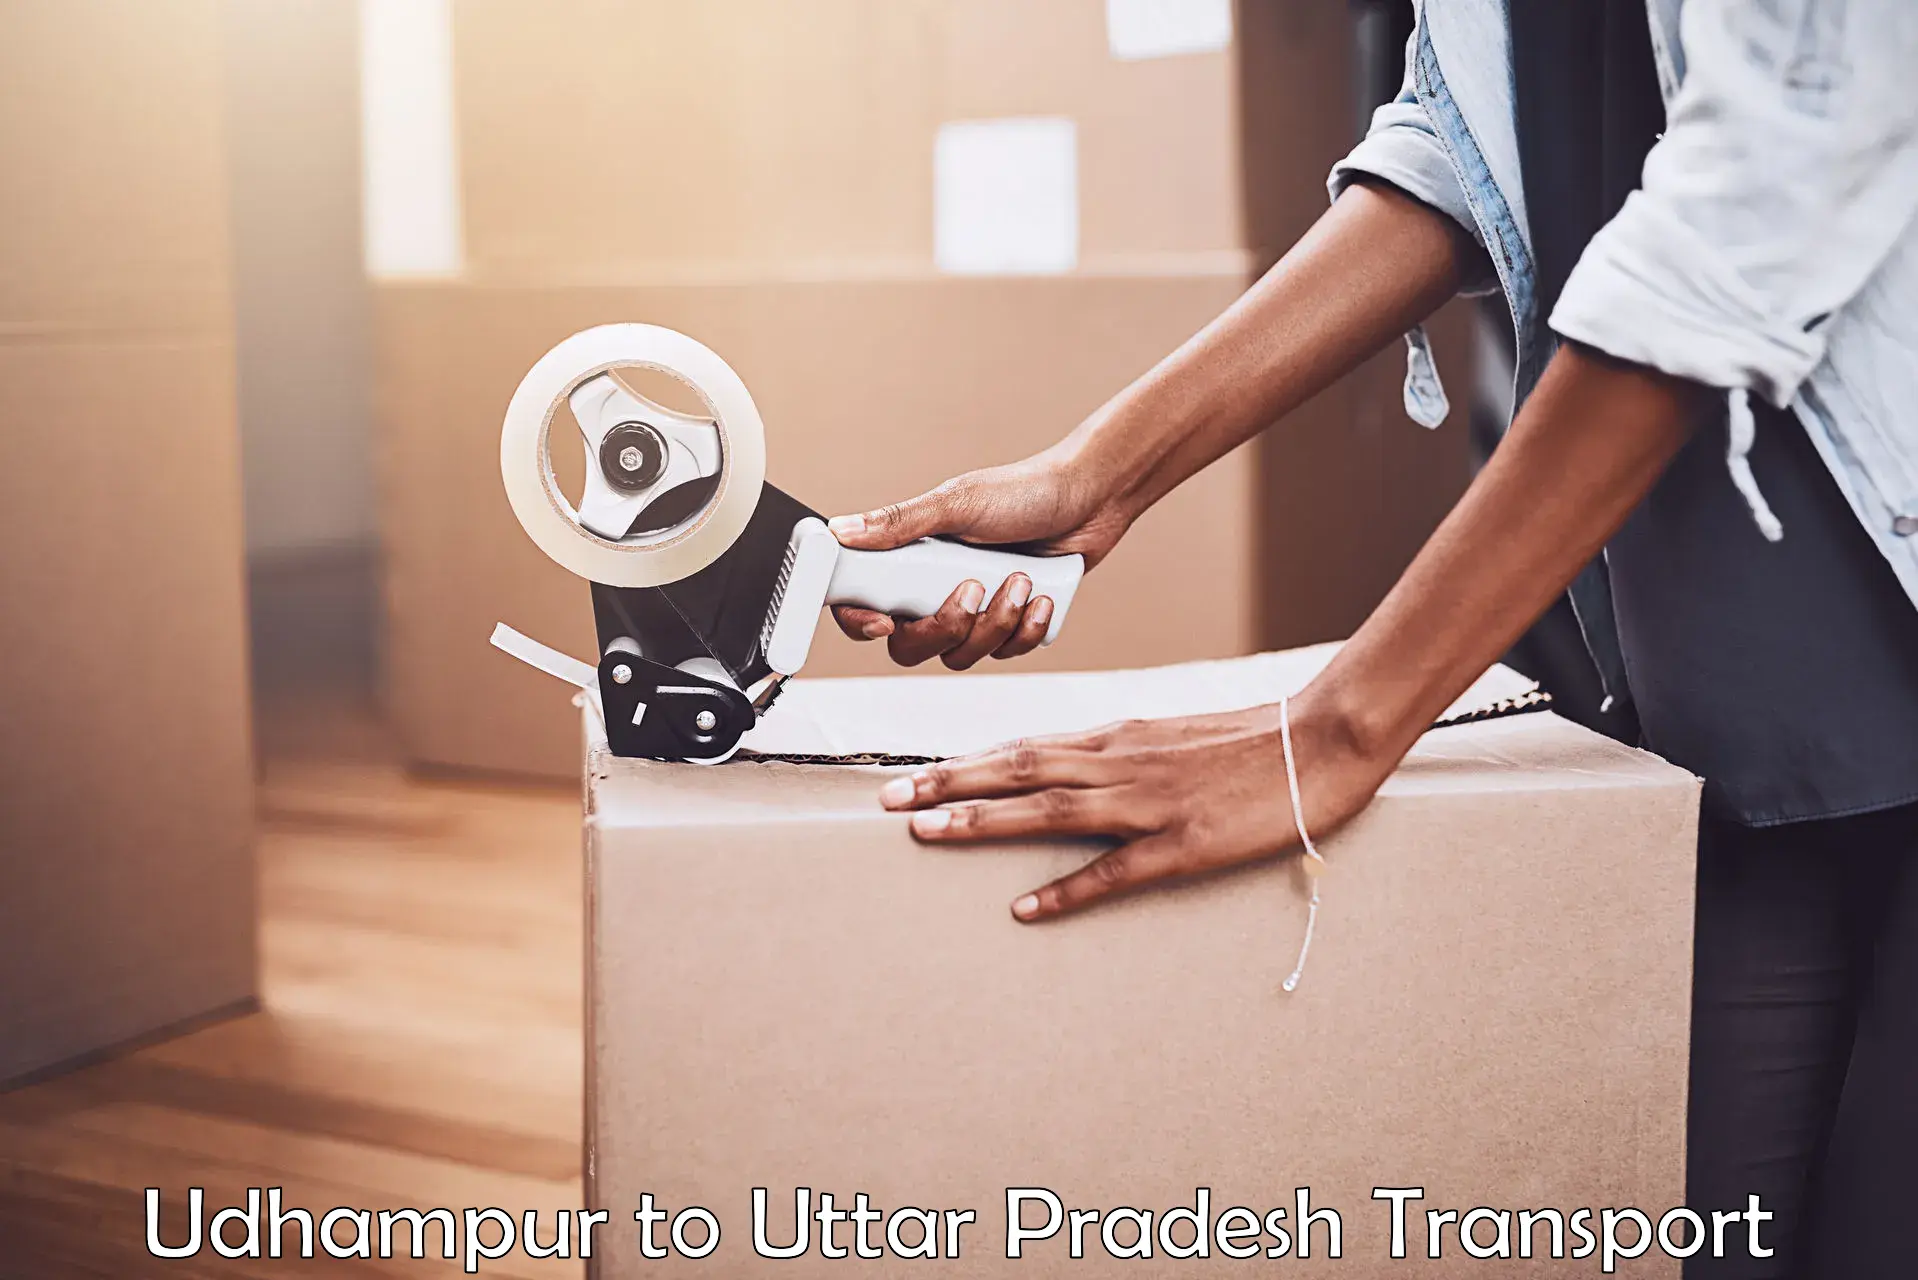 Cargo transport services in Udhampur to Orai